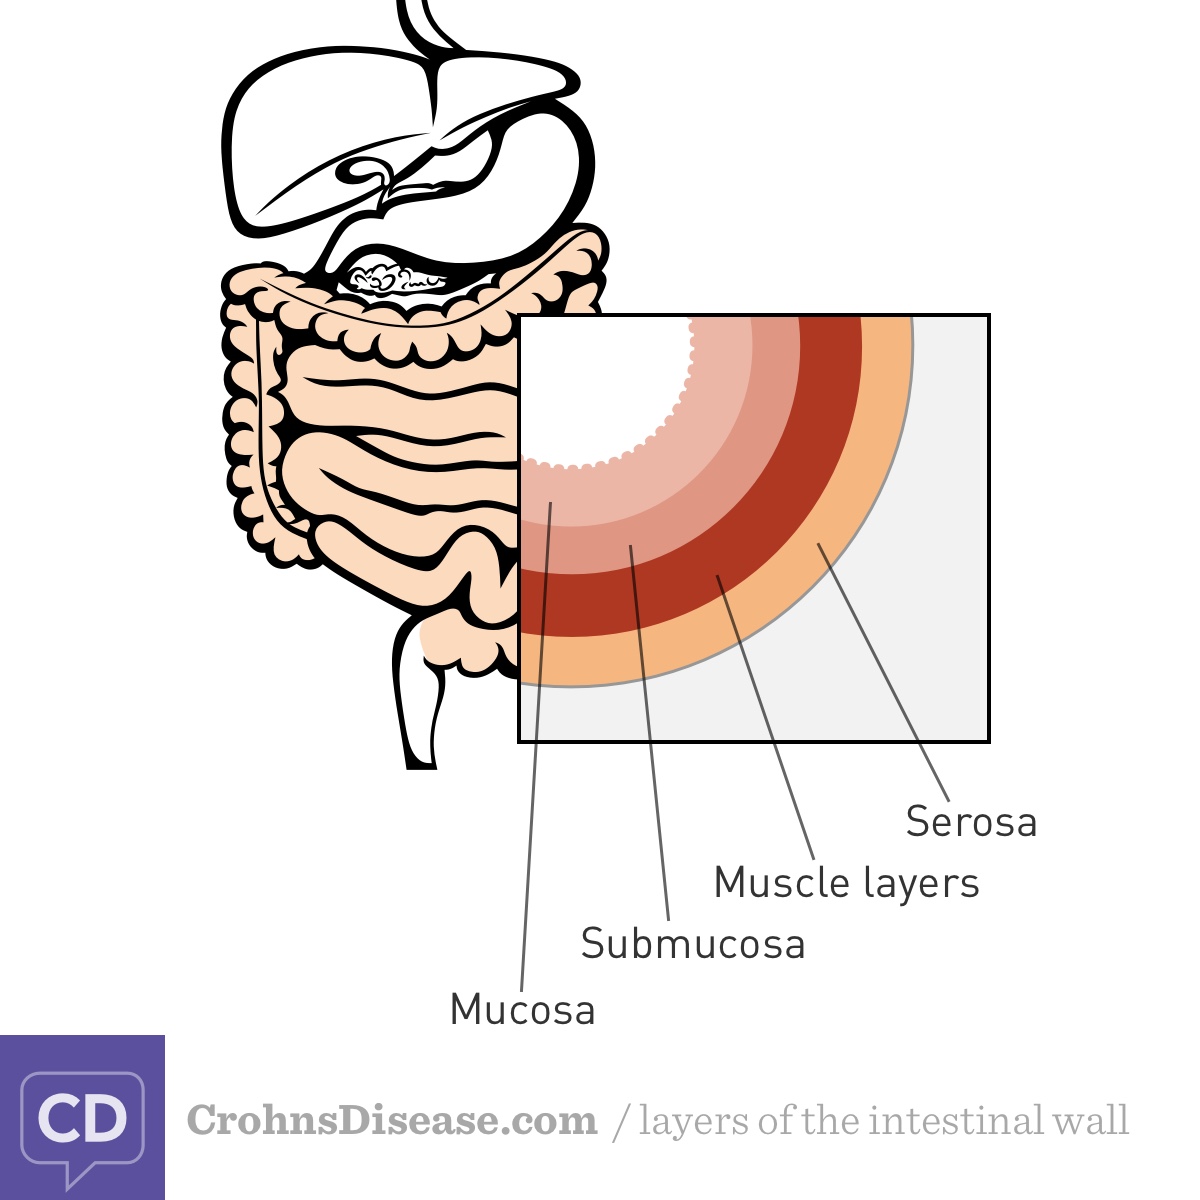 Layers of the digestive tract. The innermost layer is the mucosa, followed by the submucosa, muscle layers, and serosa.